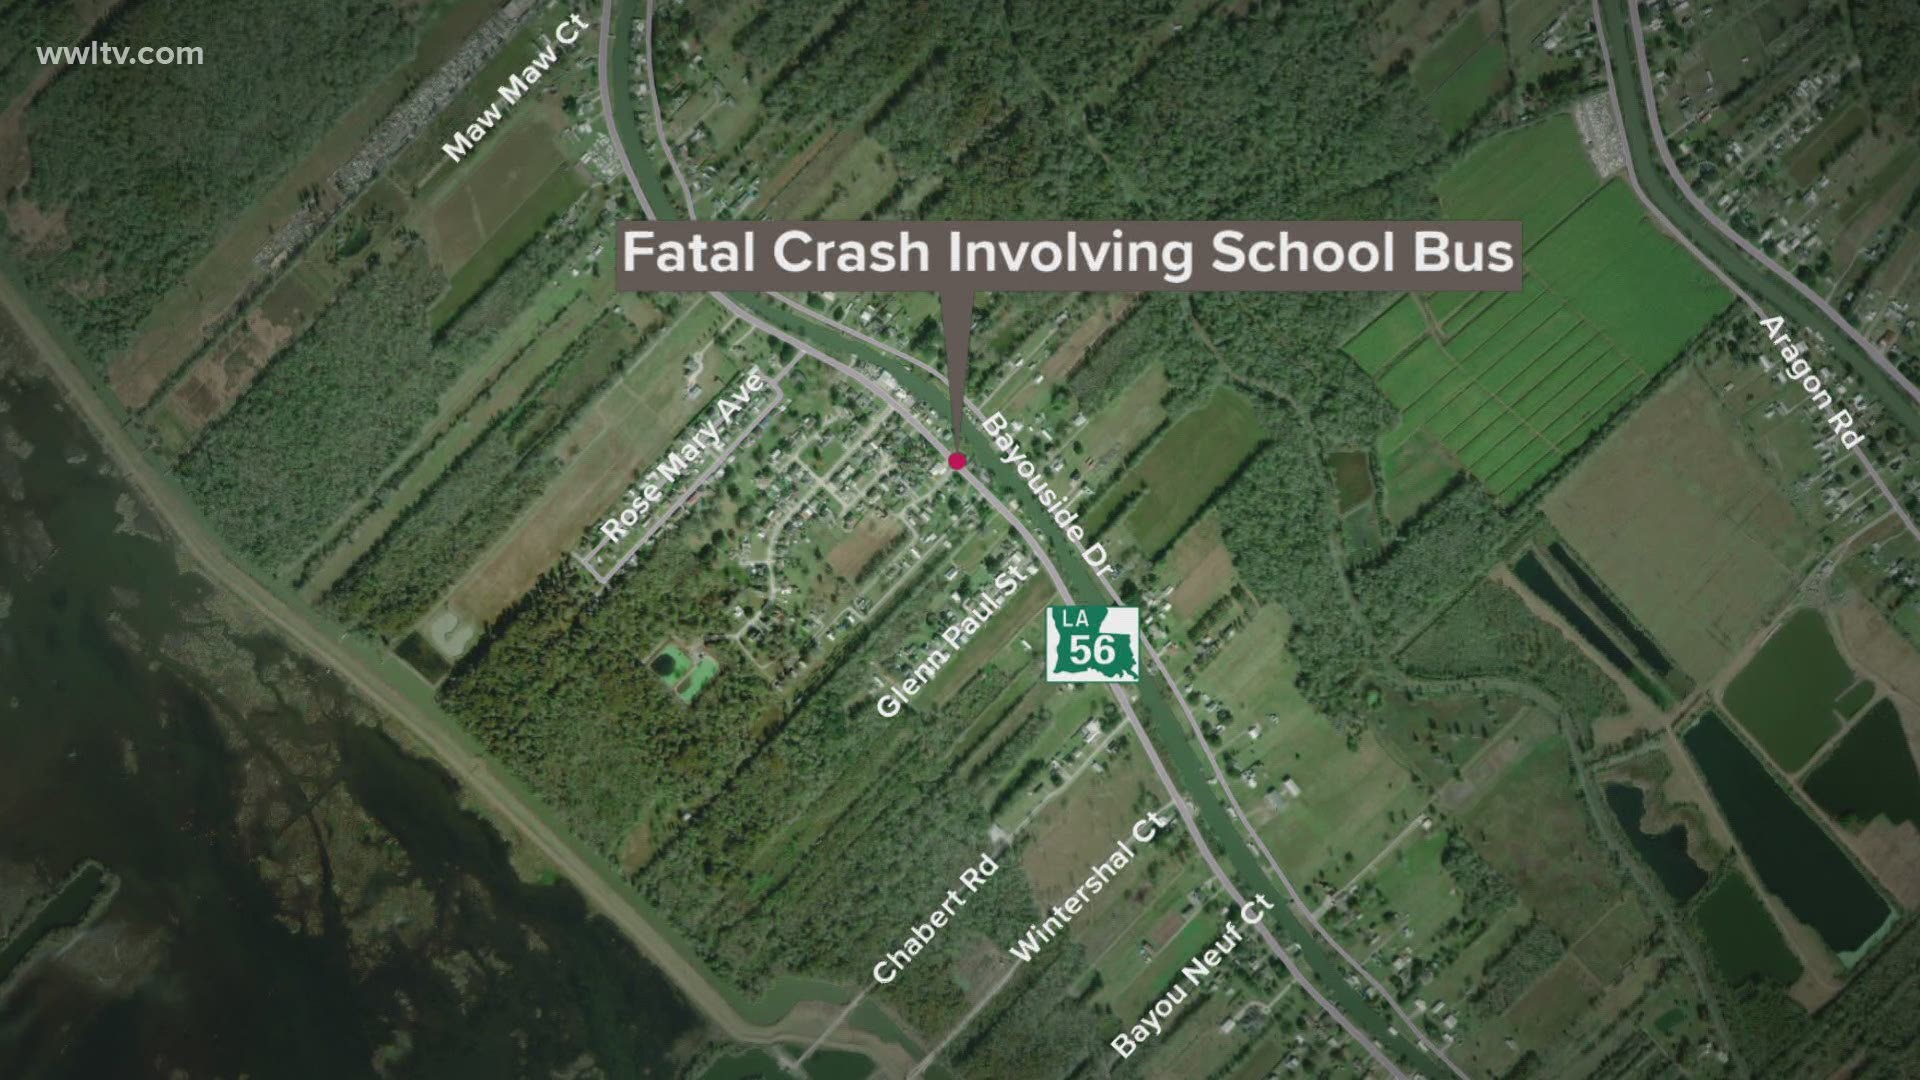 A man died after a head-on collision with a school bus in Terrebonne Parish that sent two students to a hospital on Wednesday morning, police said.